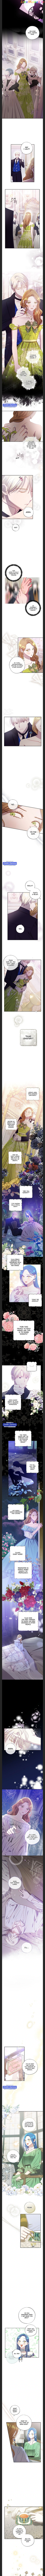 I am Afraid I have Failed to Divorce Chapter 59 page 2